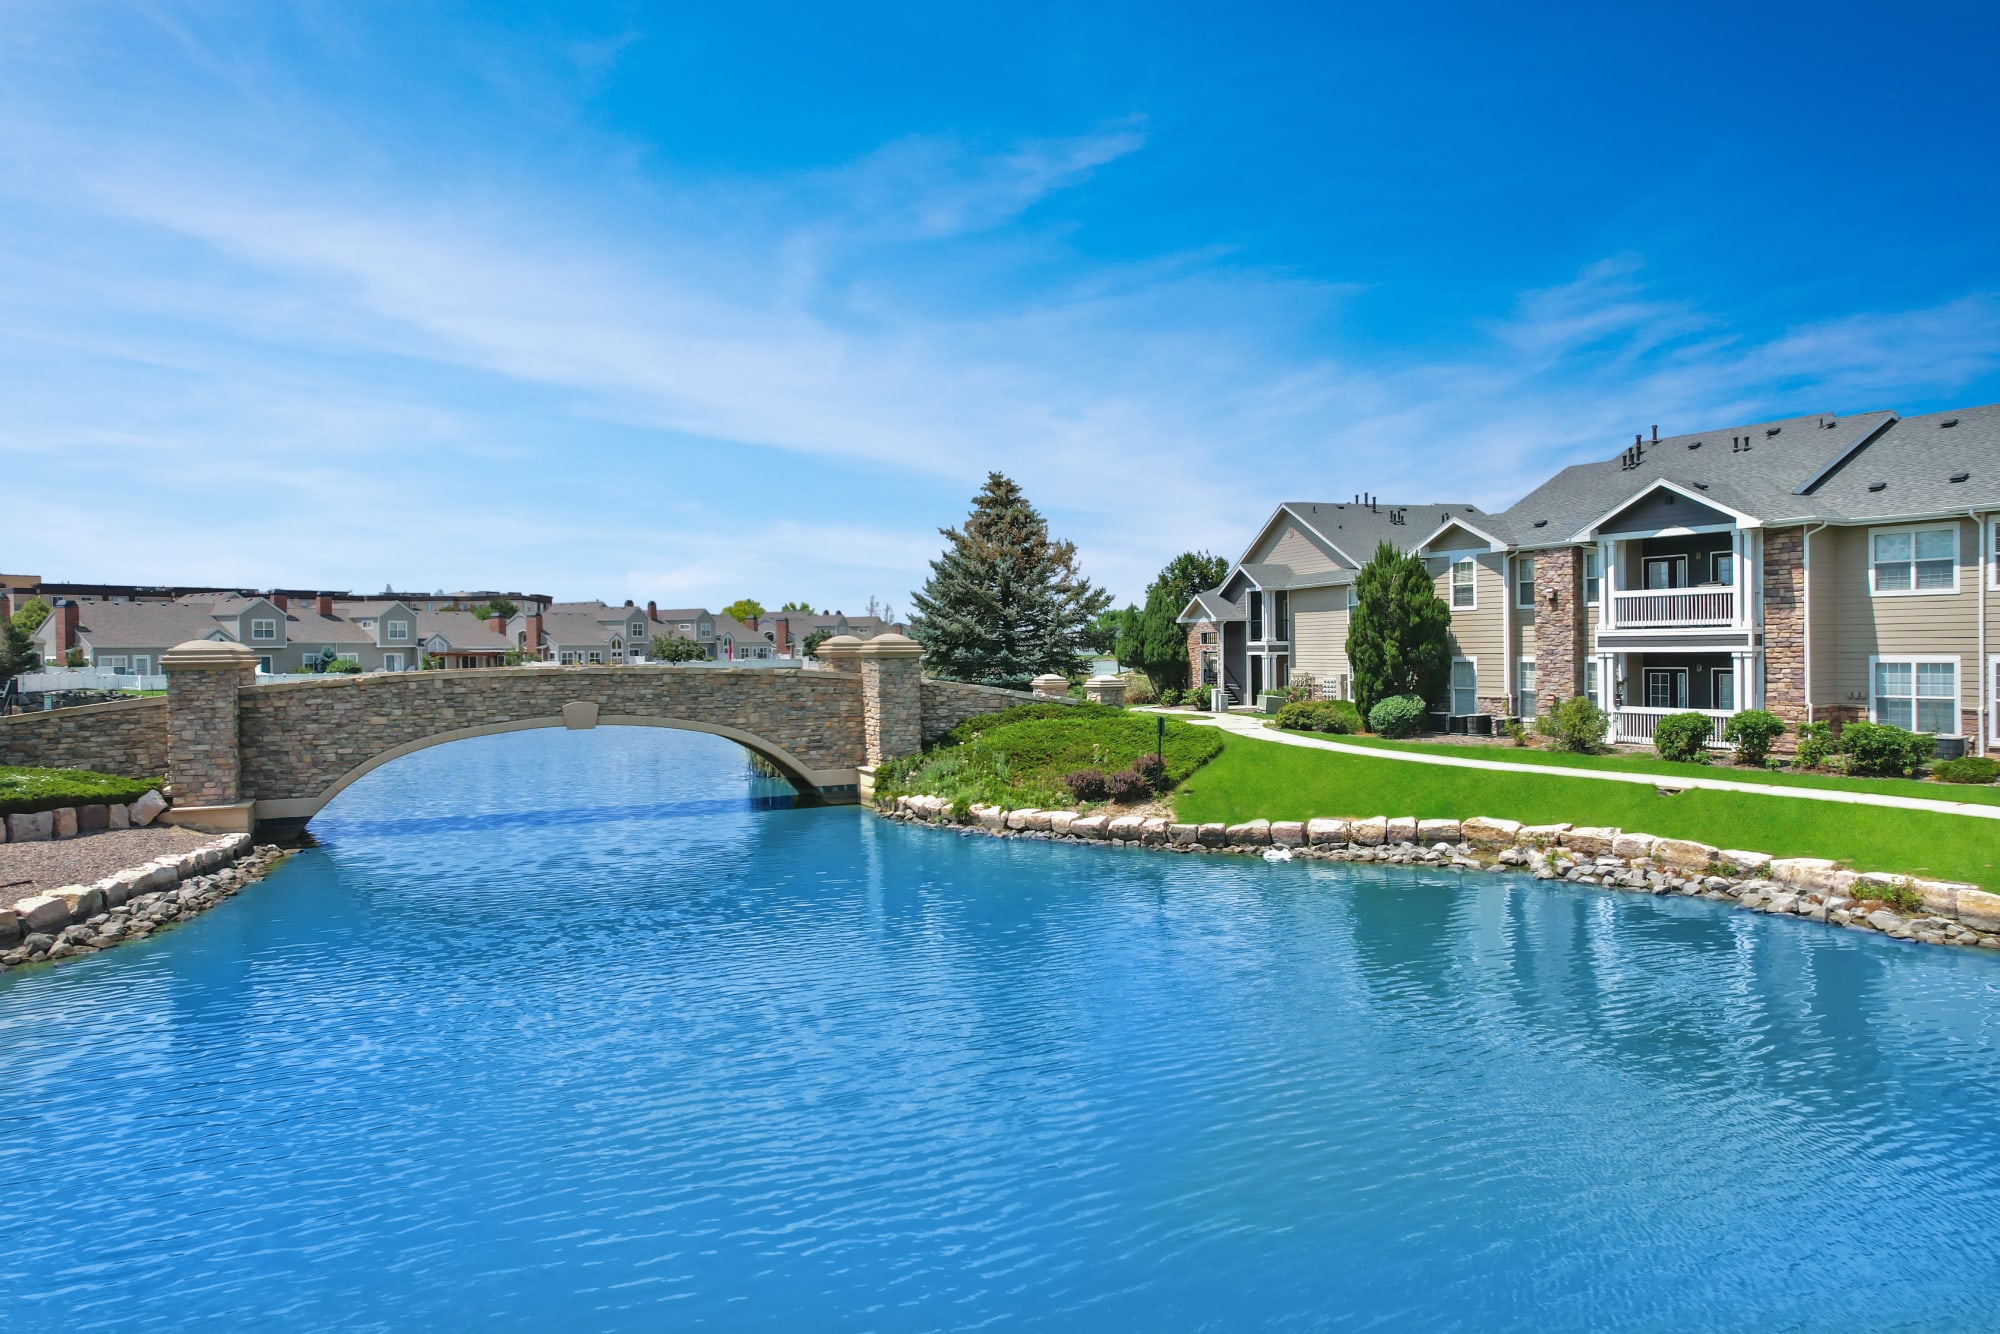 Lake and Exterior Building View with Bridge over Lake of Gateway Park Apartments in Denver, Colorado